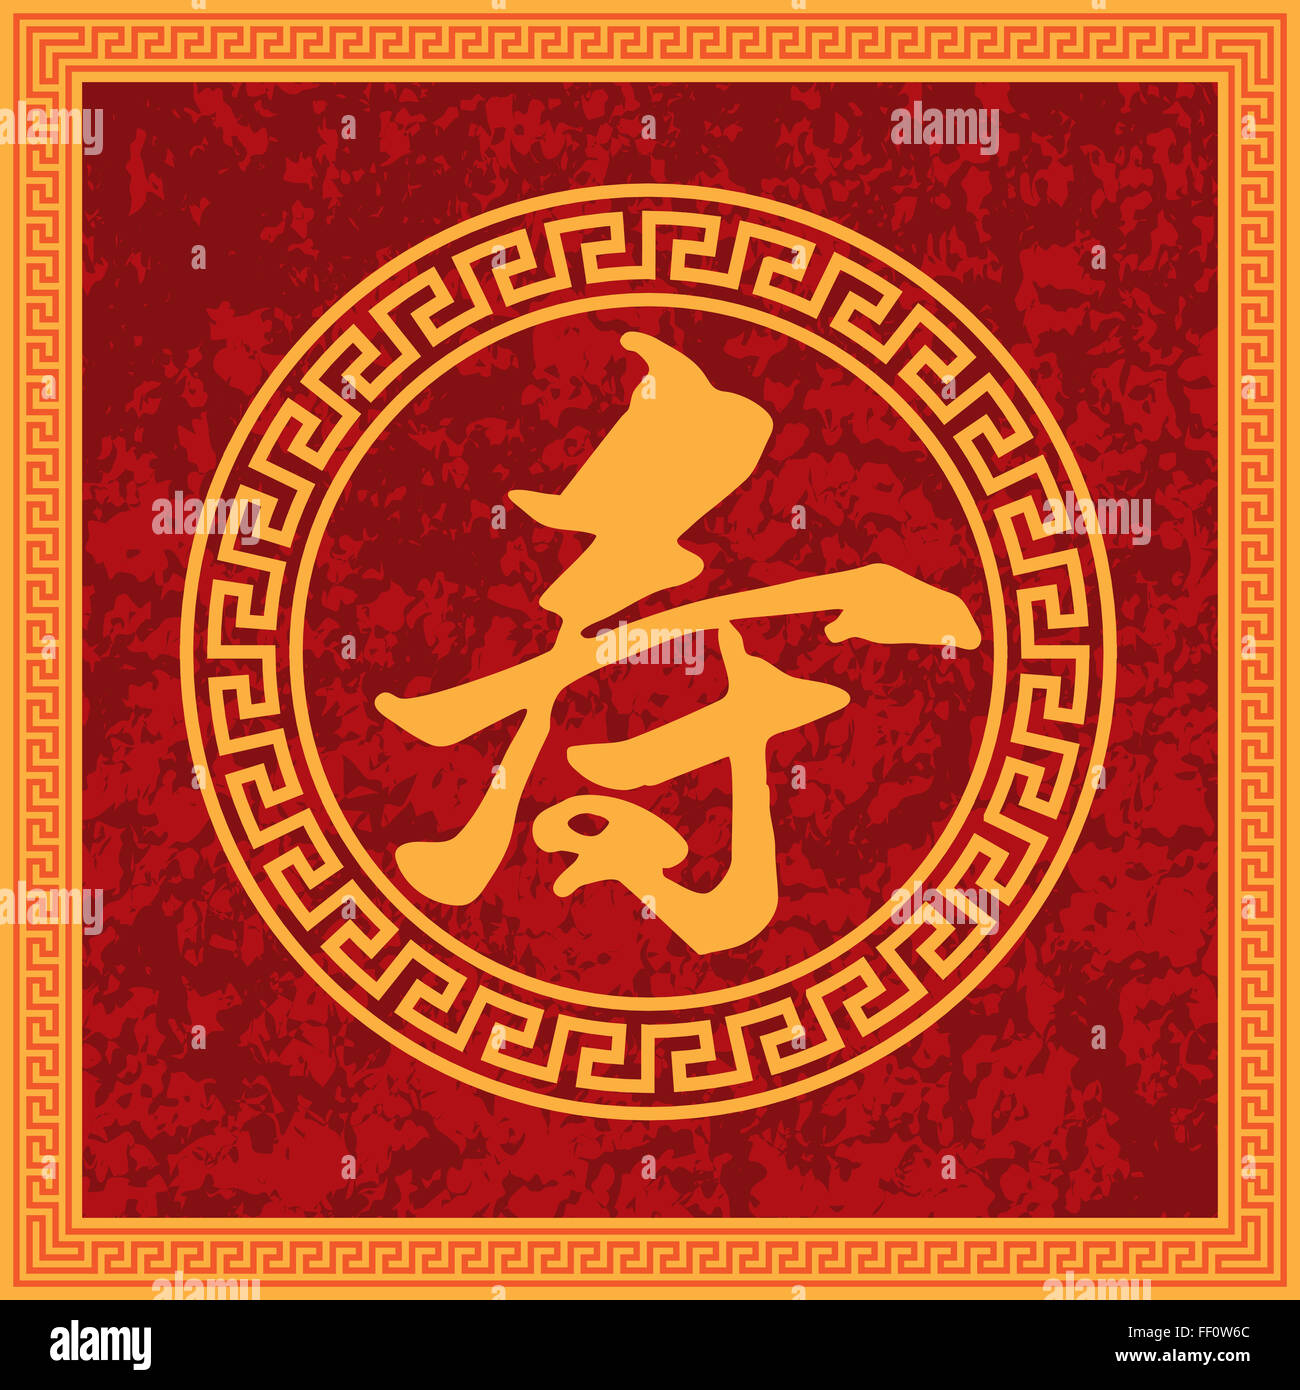 Chinese Longevity Calligraphy Text in Square Texture Red Background Frame Illustration Stock Photo